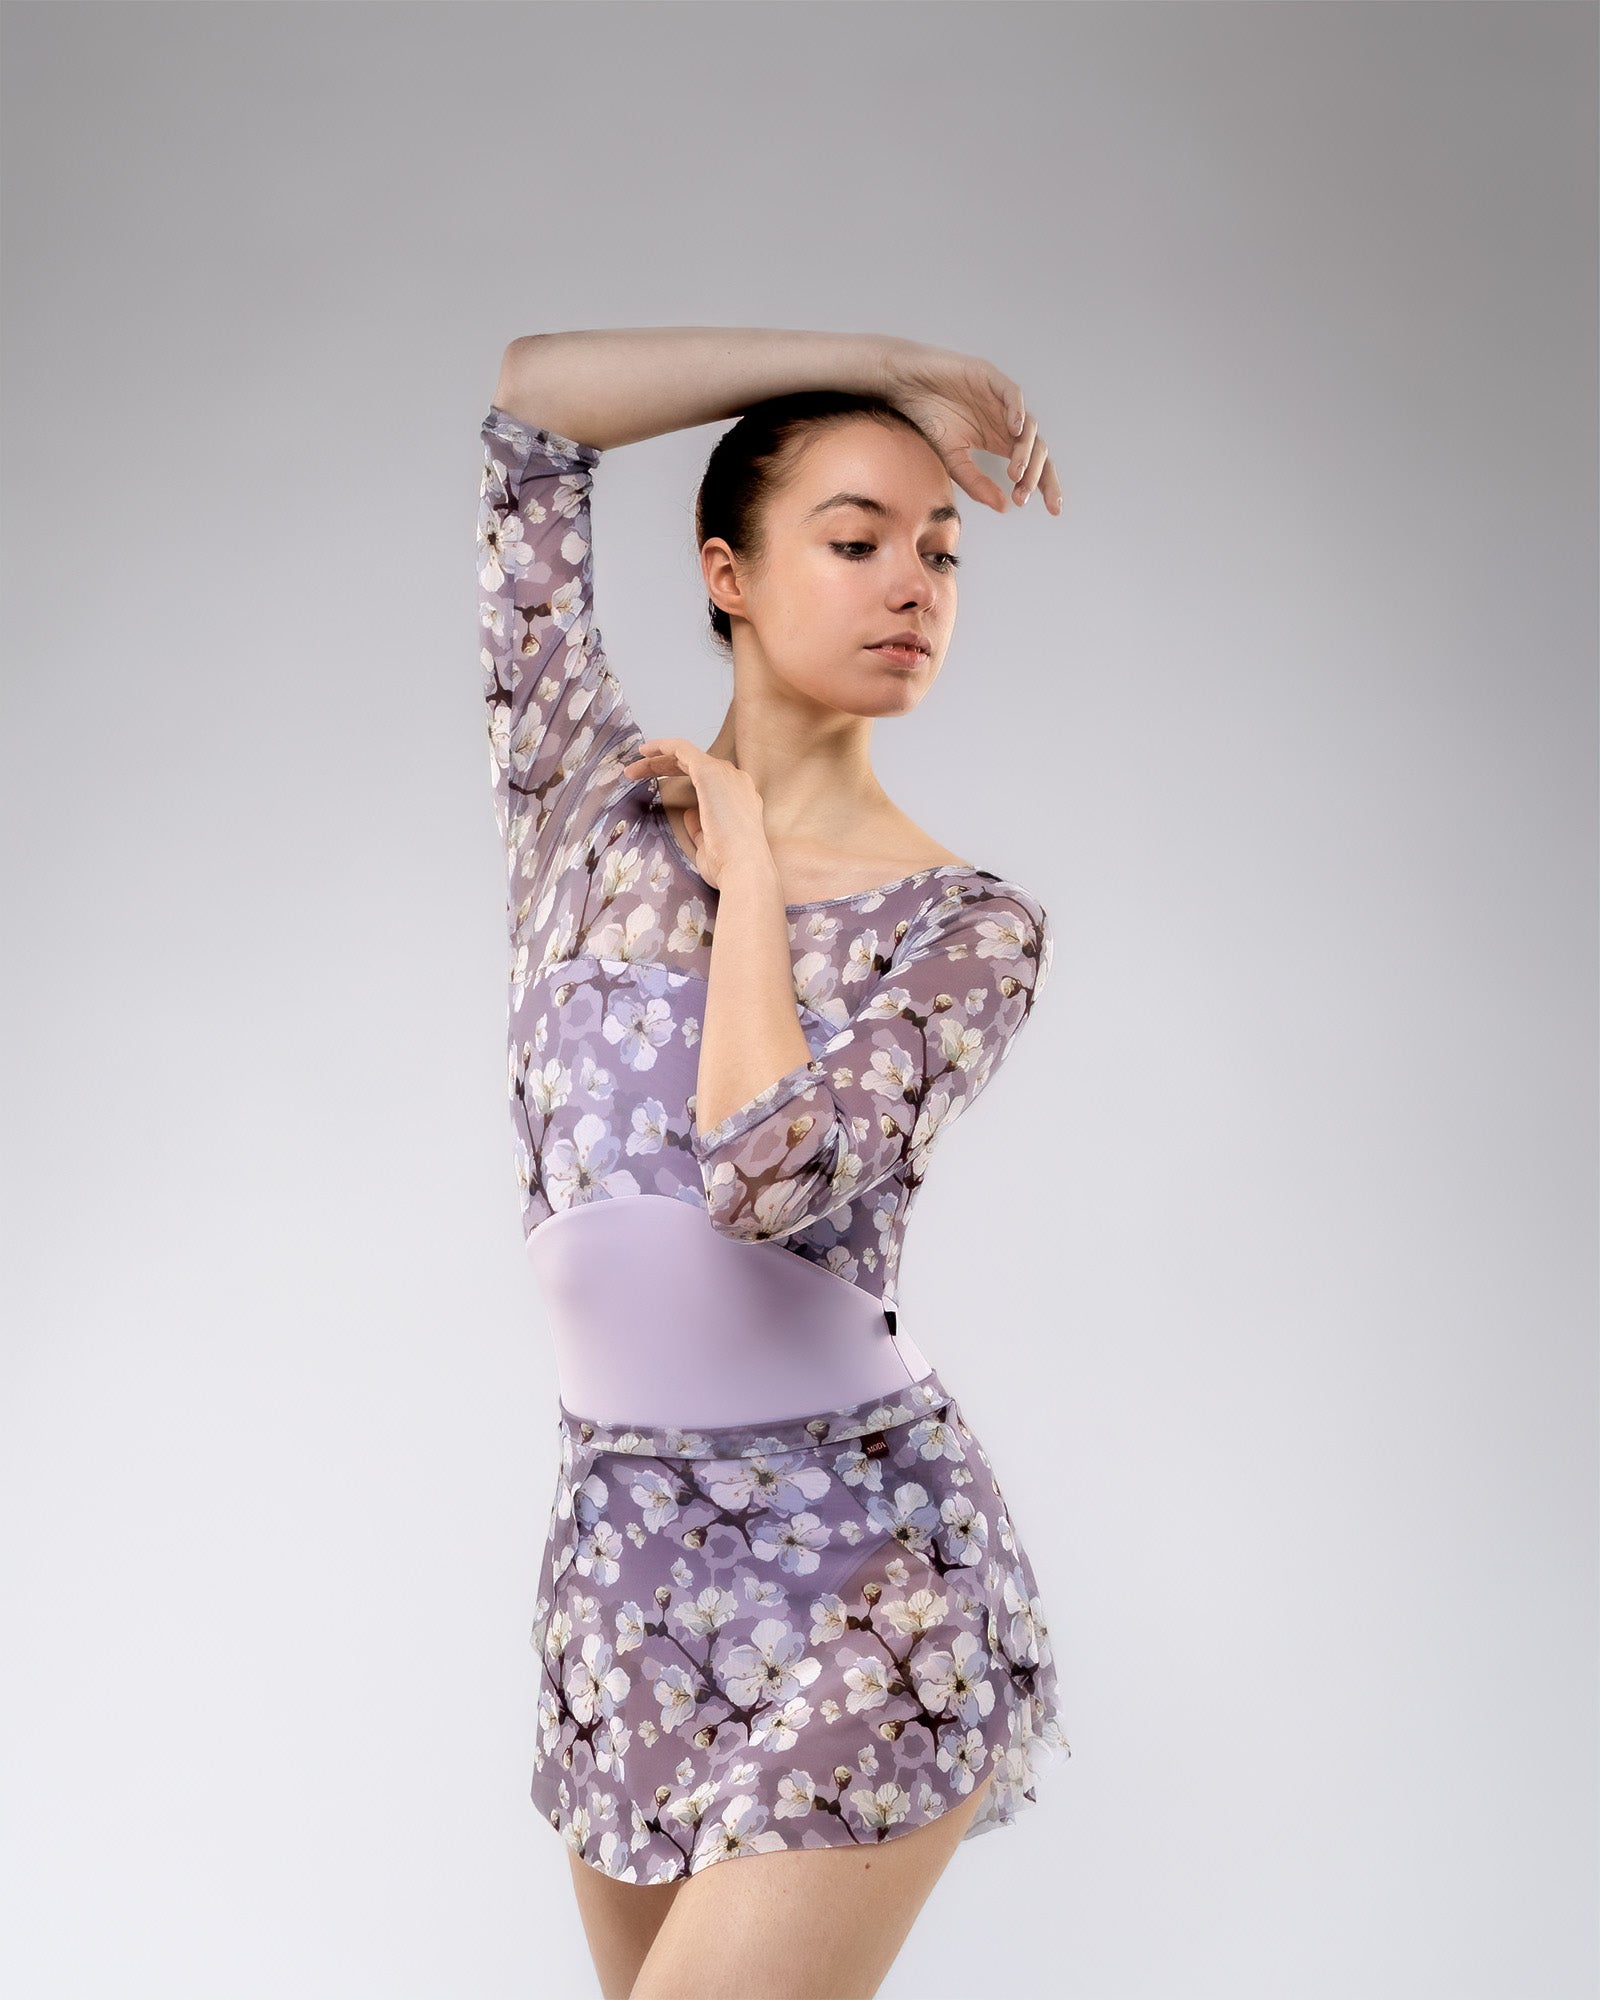 Dancer wearing lilac and purple floral pattern print floaty mesh SAB ballet skirt with matching leotard set